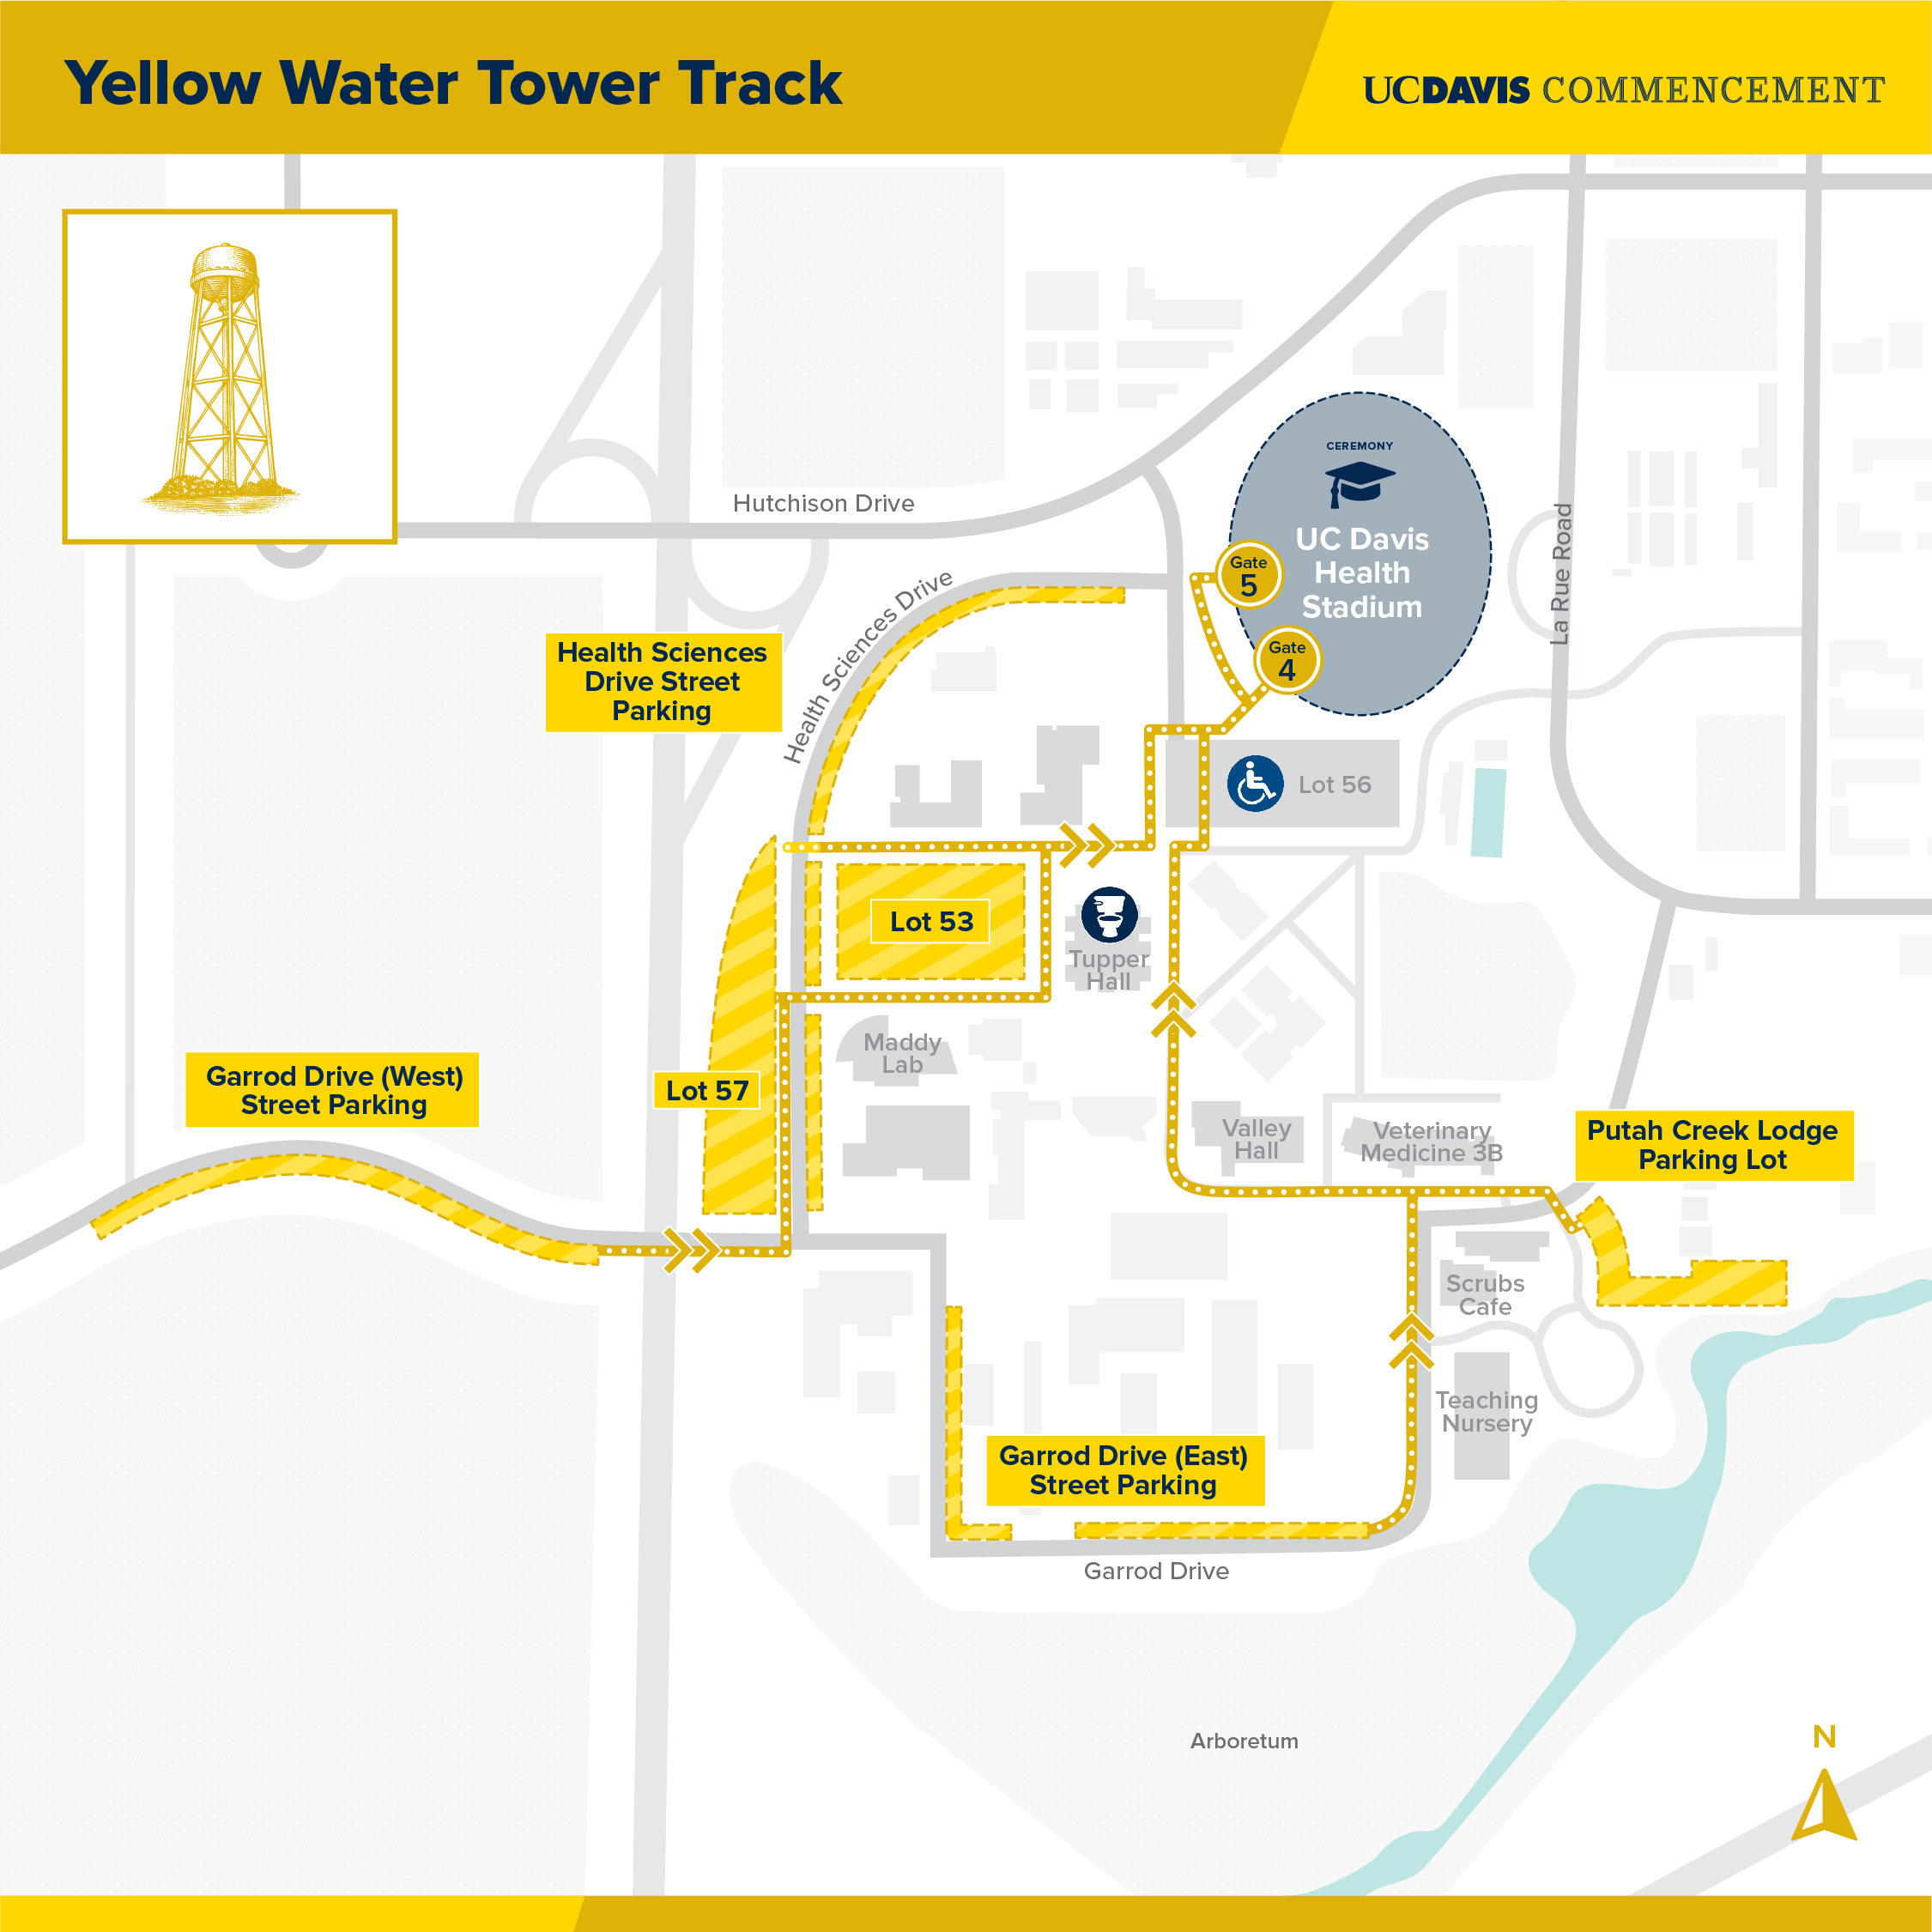 Yellow Water Tower Track